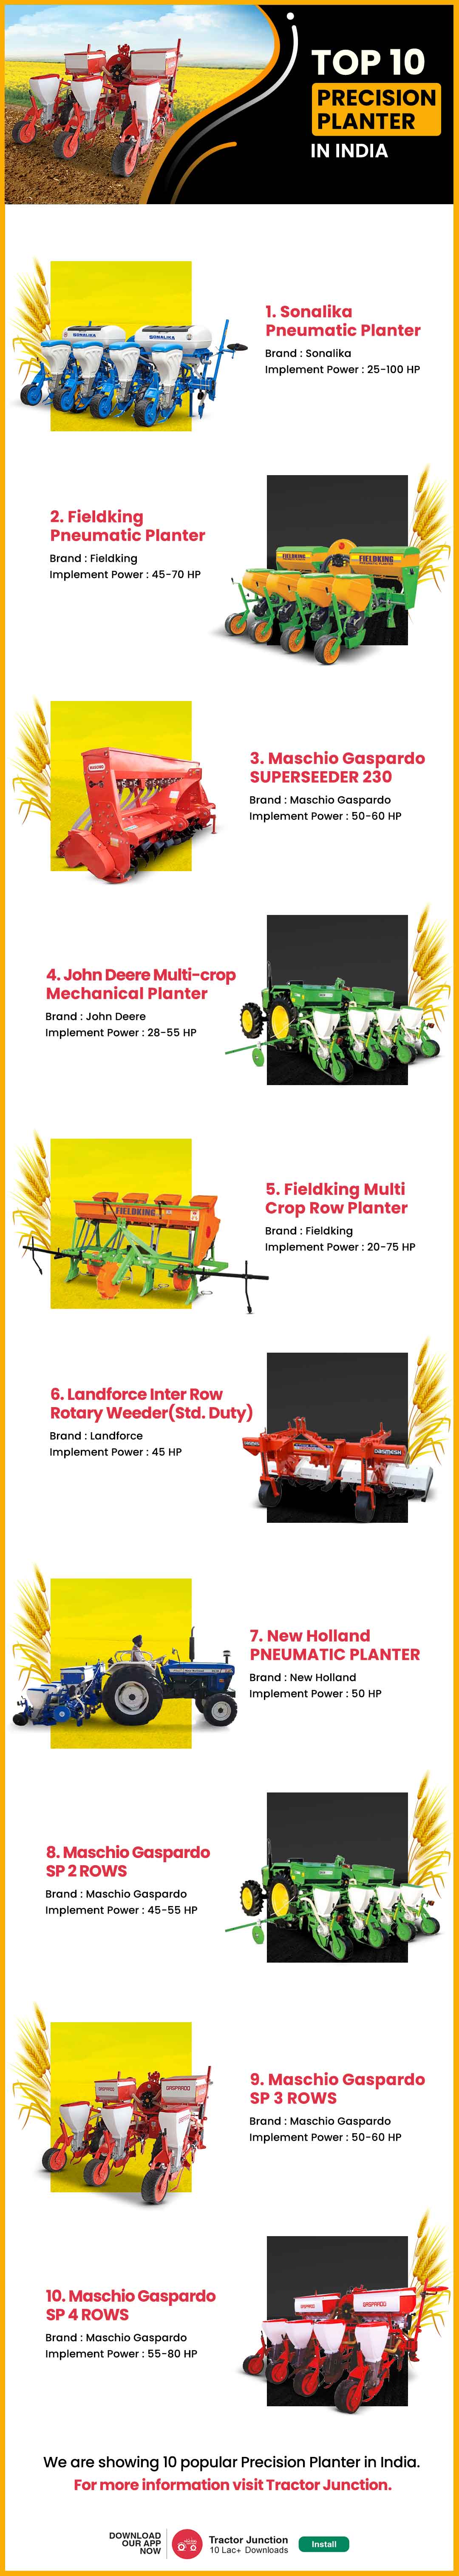 Top 10 Precision Planter Price List - Features and Overview